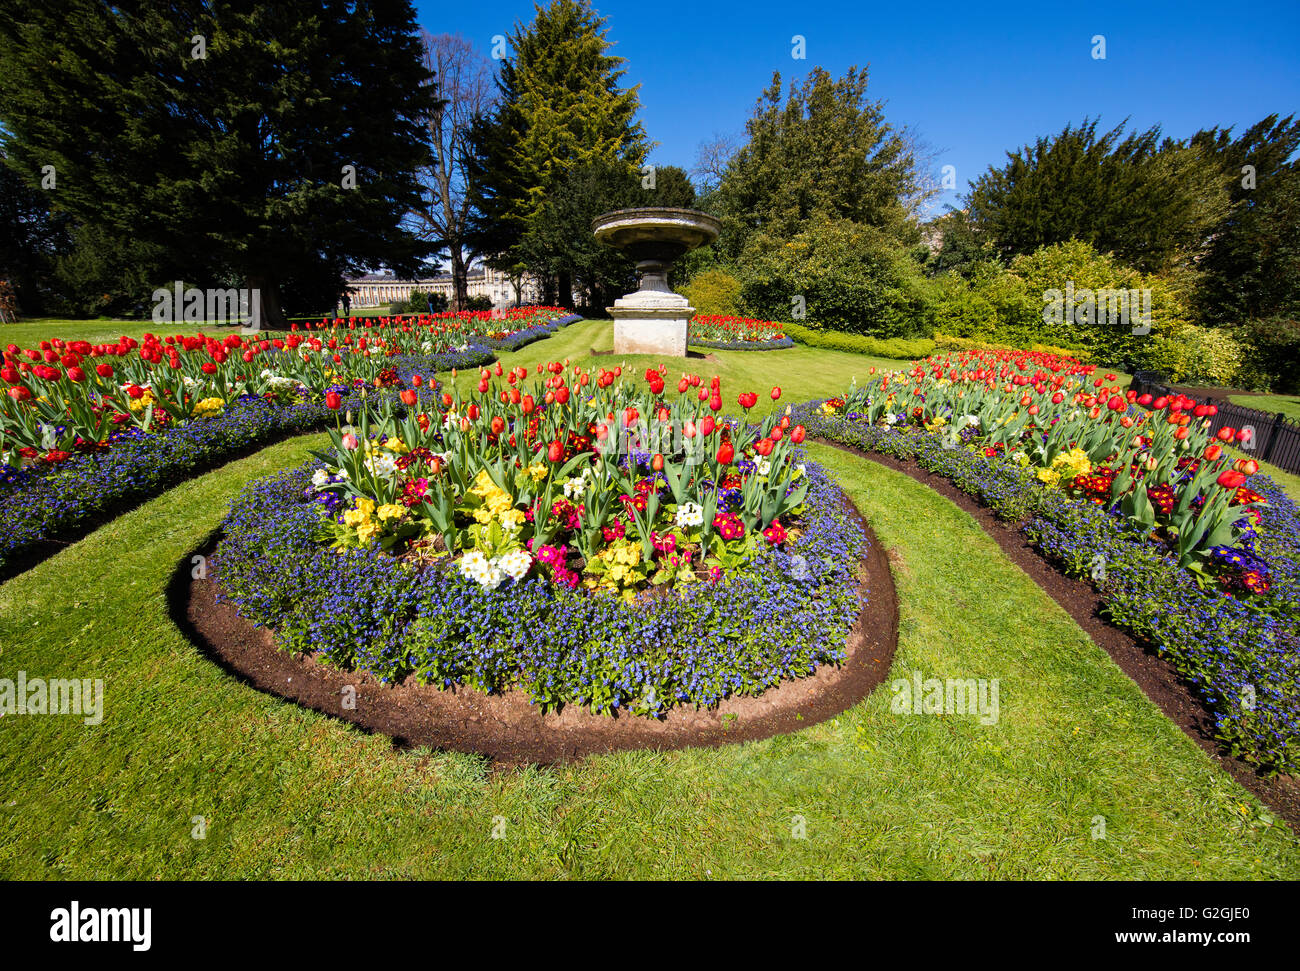 Municipal gardens with flower beds of tulips and annual bedding plants near Royal Crescent in Bath Somerset UK Stock Photo